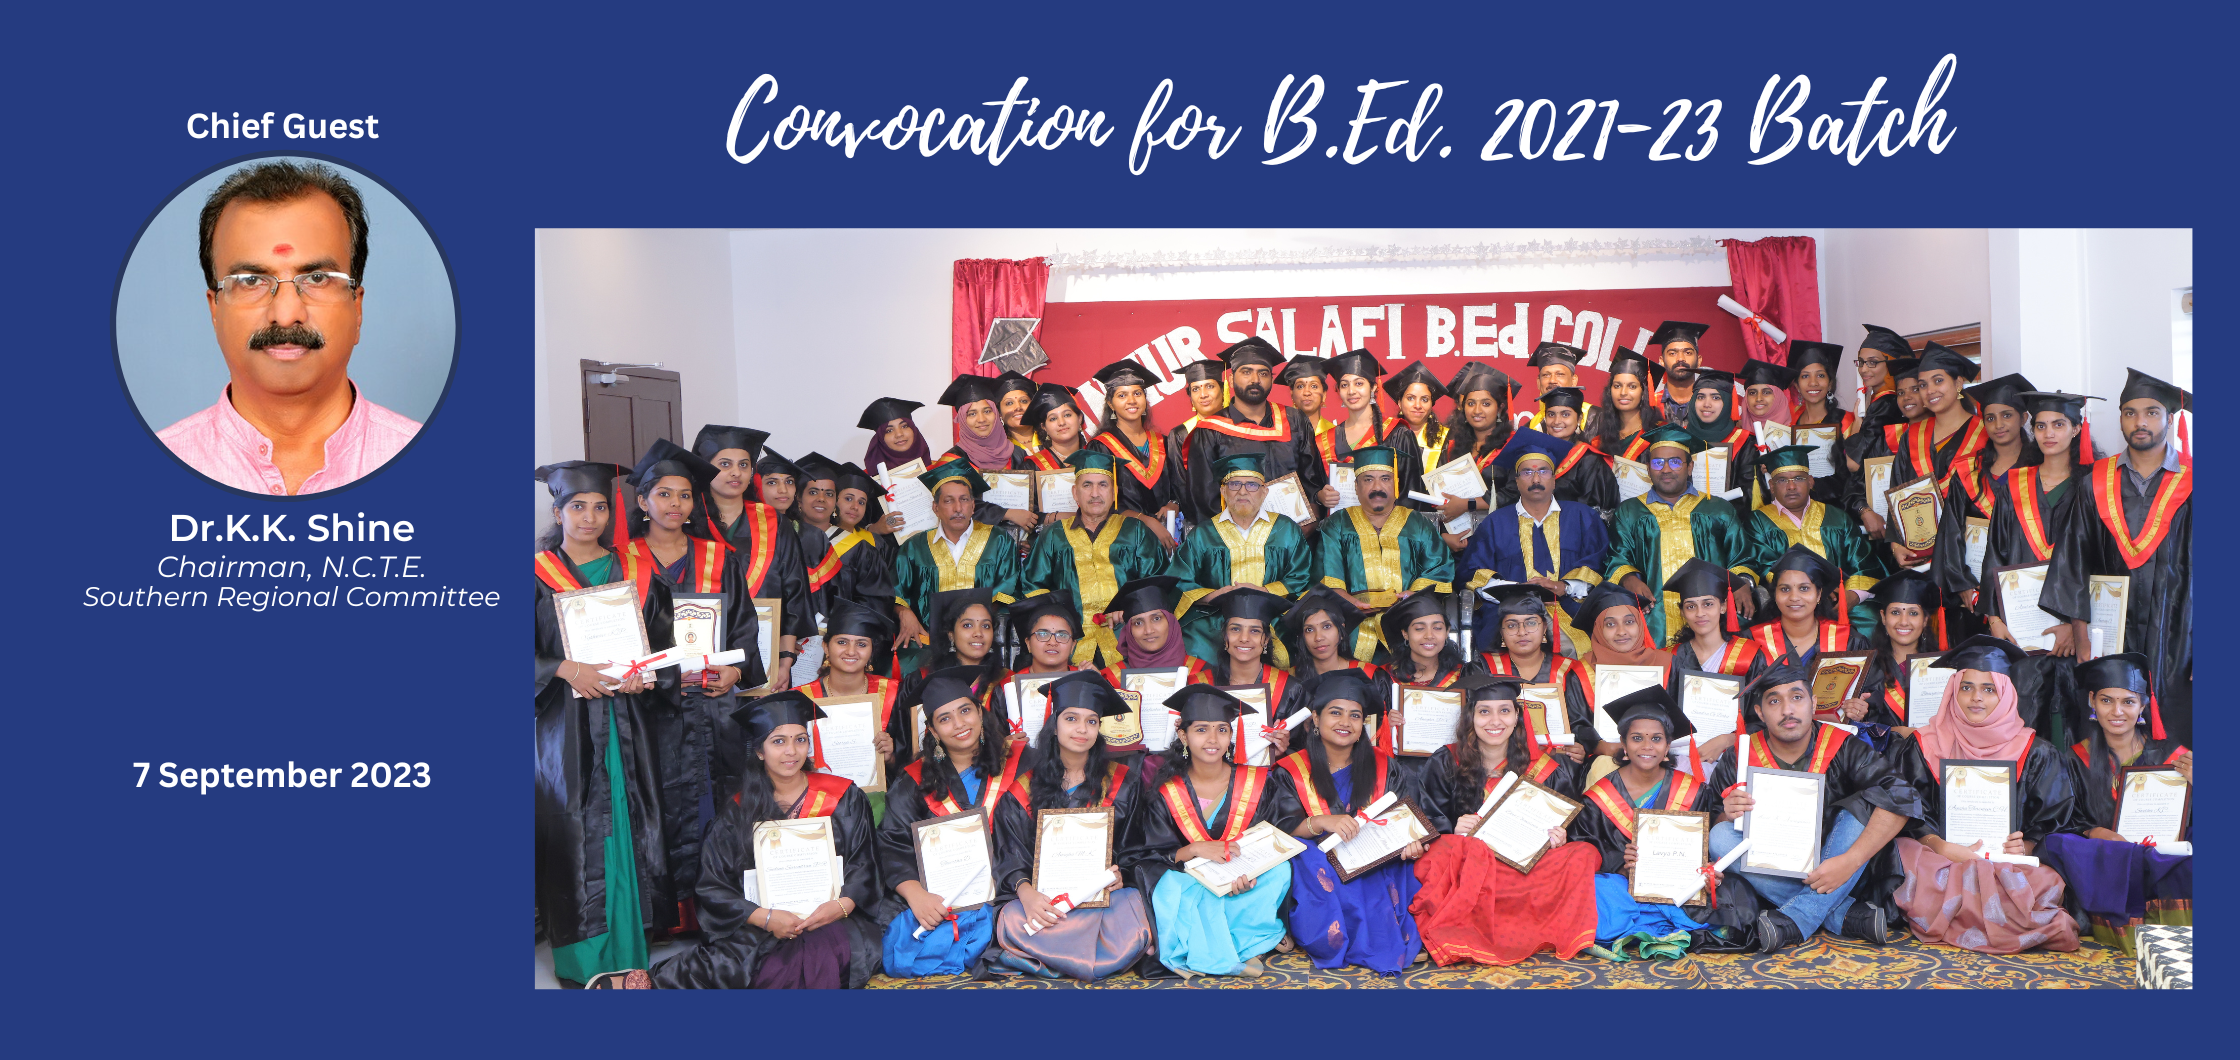 CONVOCATION FOR THE B.Ed. BATCH 2021-23